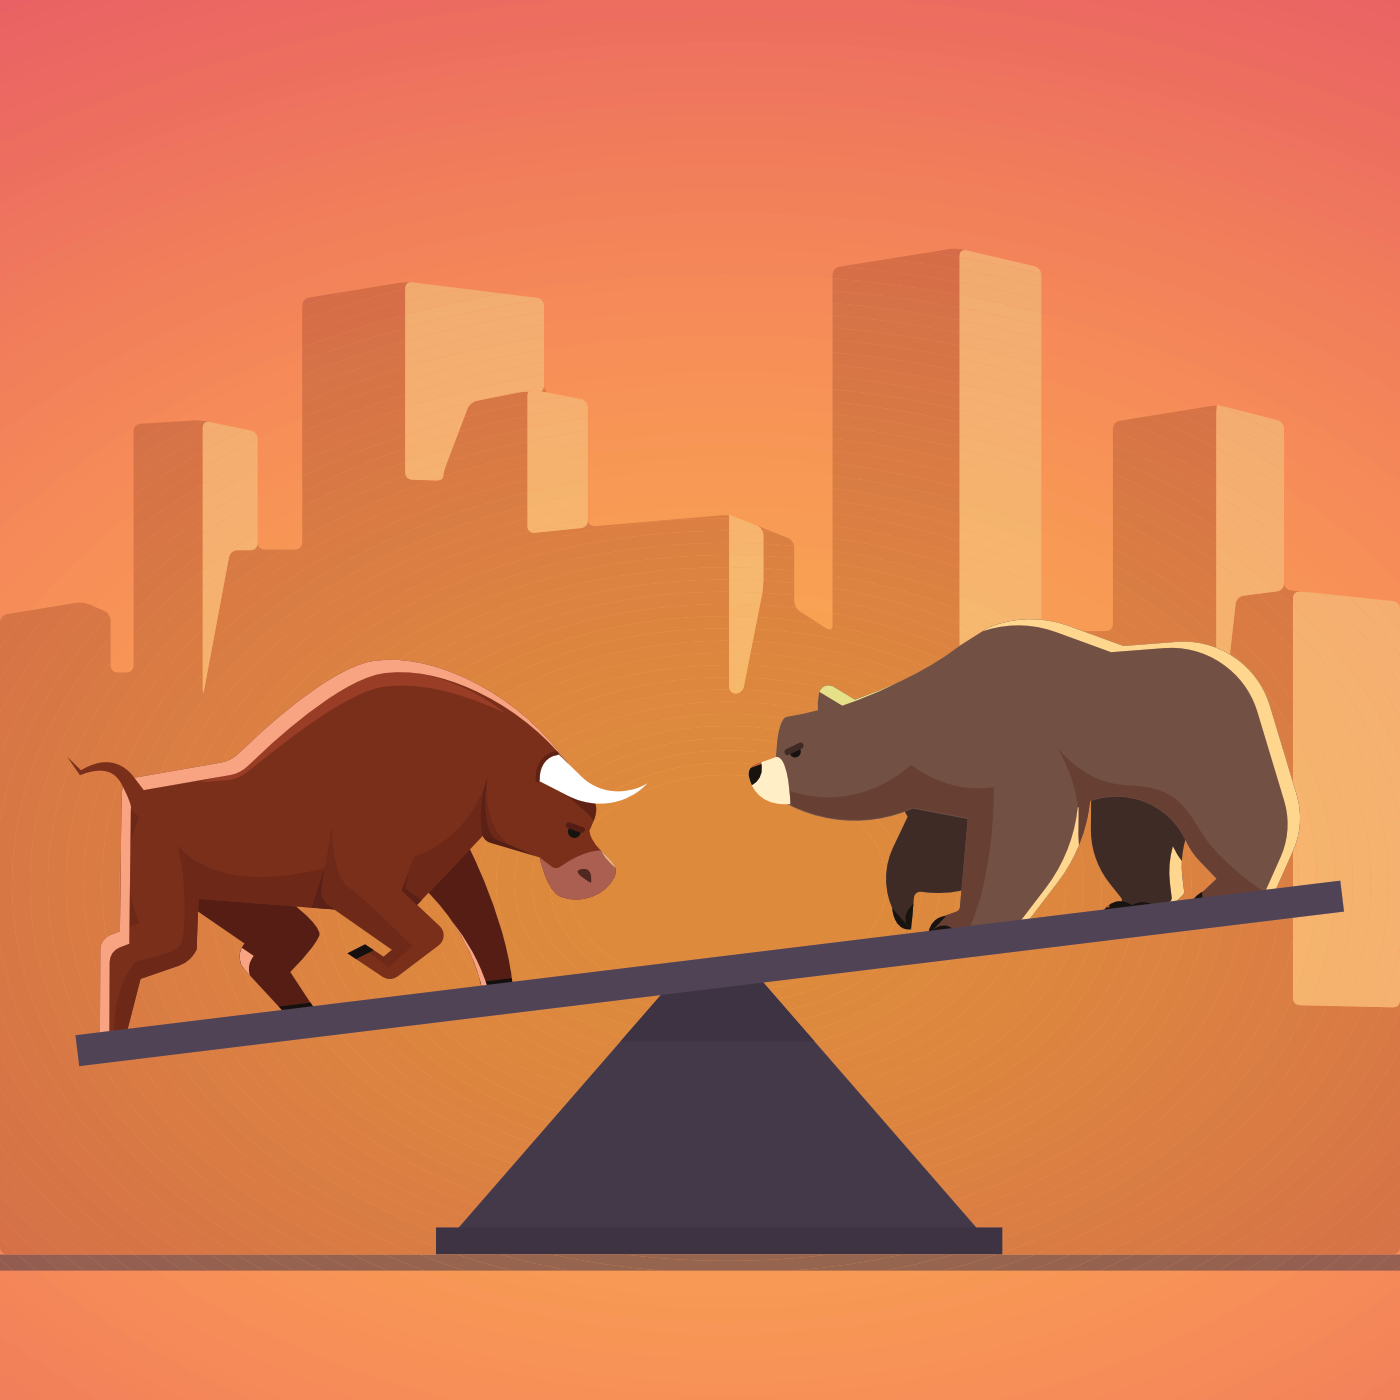 An illustration of a bull and bear on either side of some scales